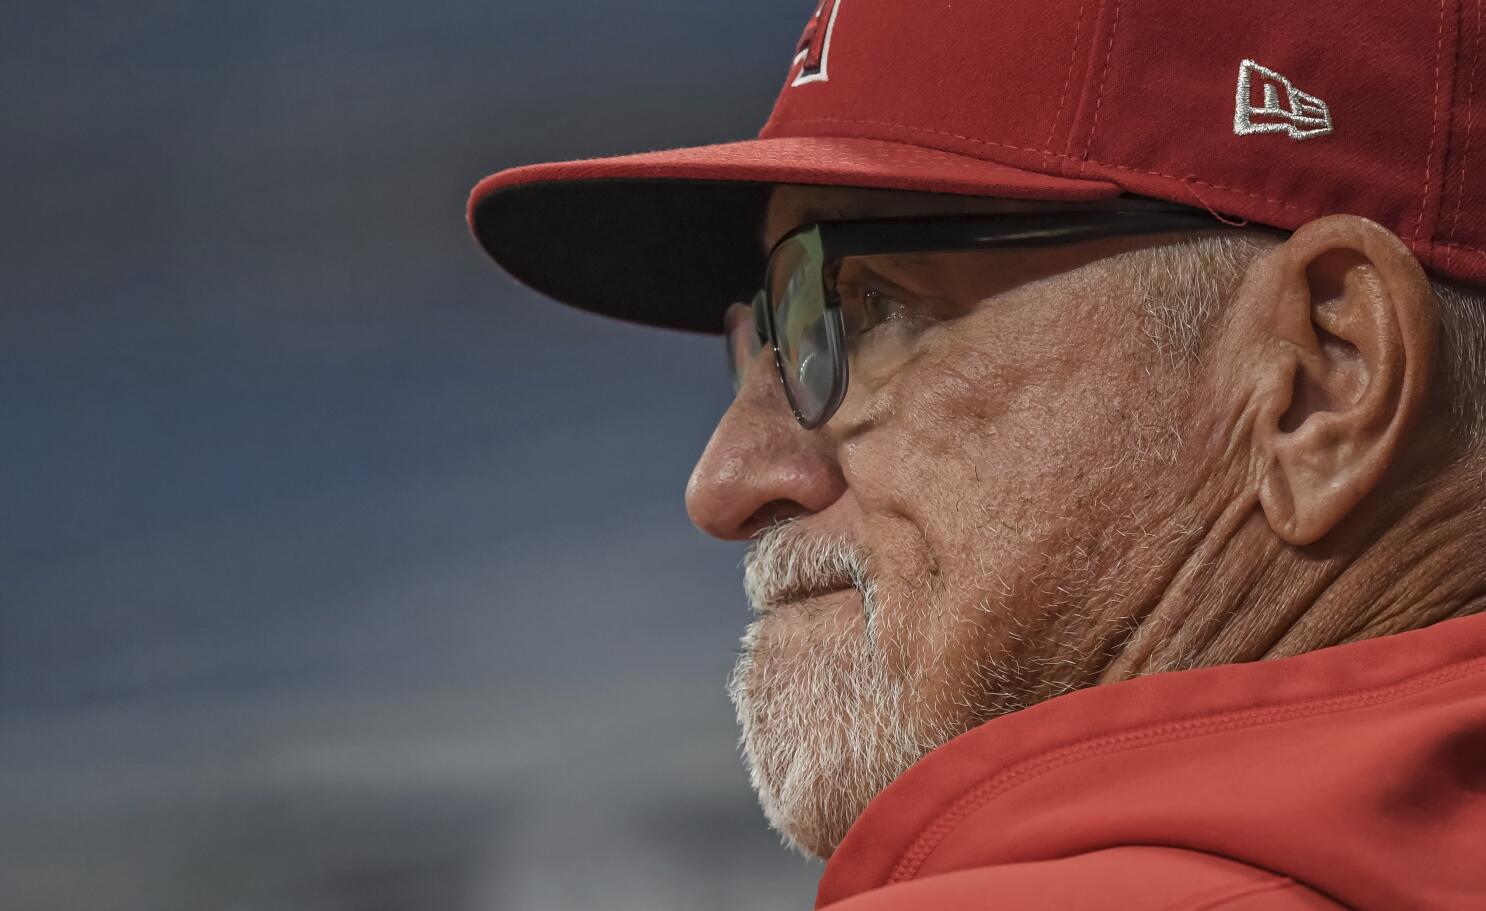 Los Angeles Angels hire Joe Maddon as manager as drug investigation looms  over team